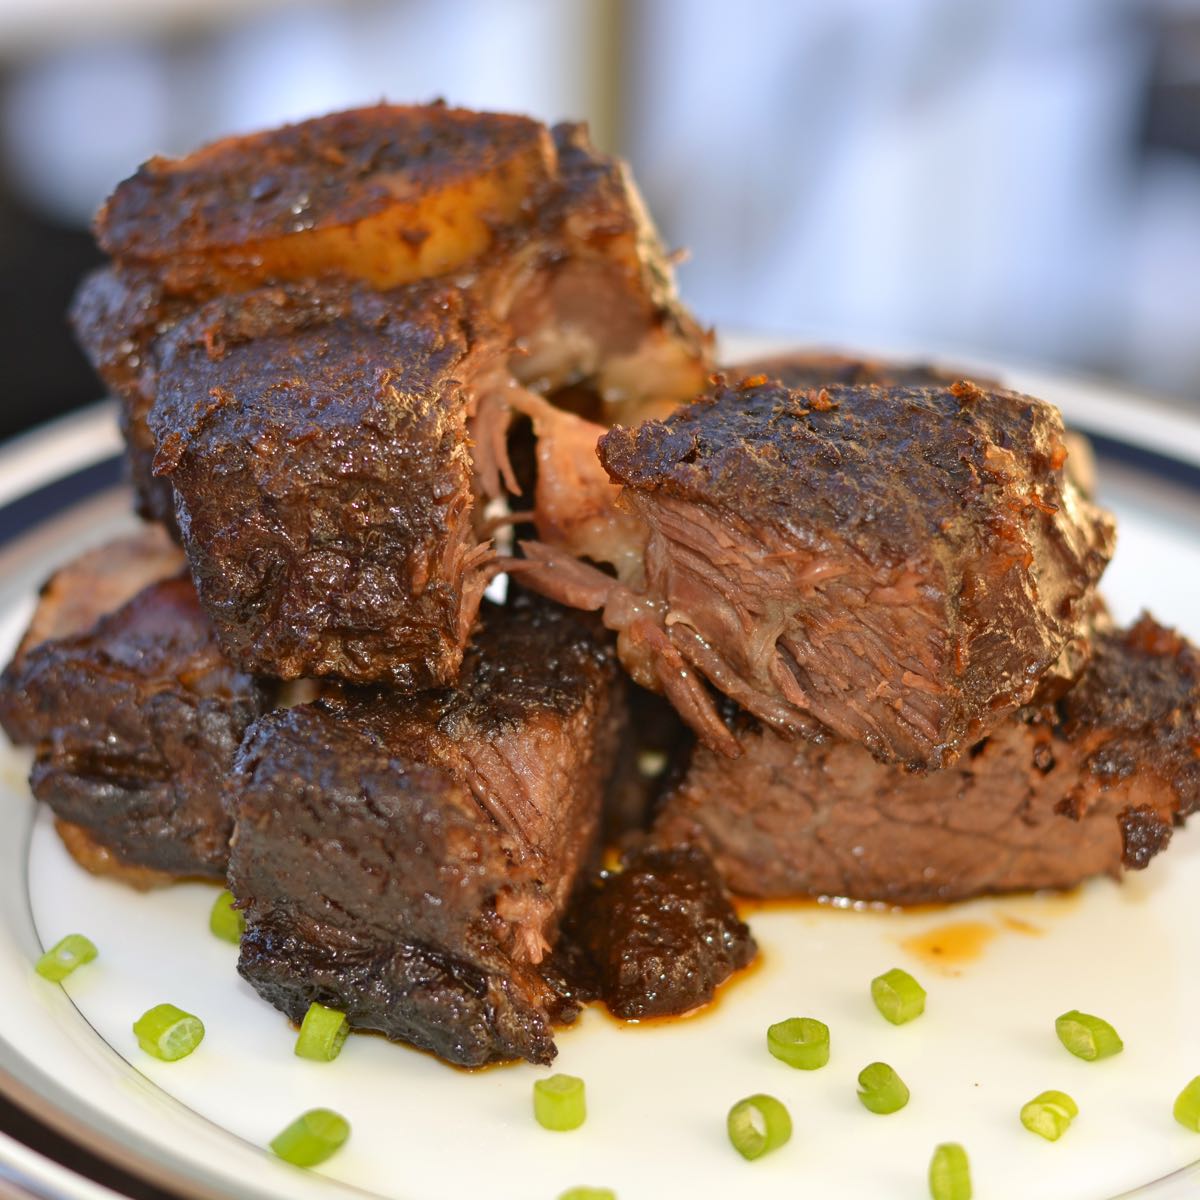 Braised Beef Short Ribs in Coffee Ancho Chile Sauce.